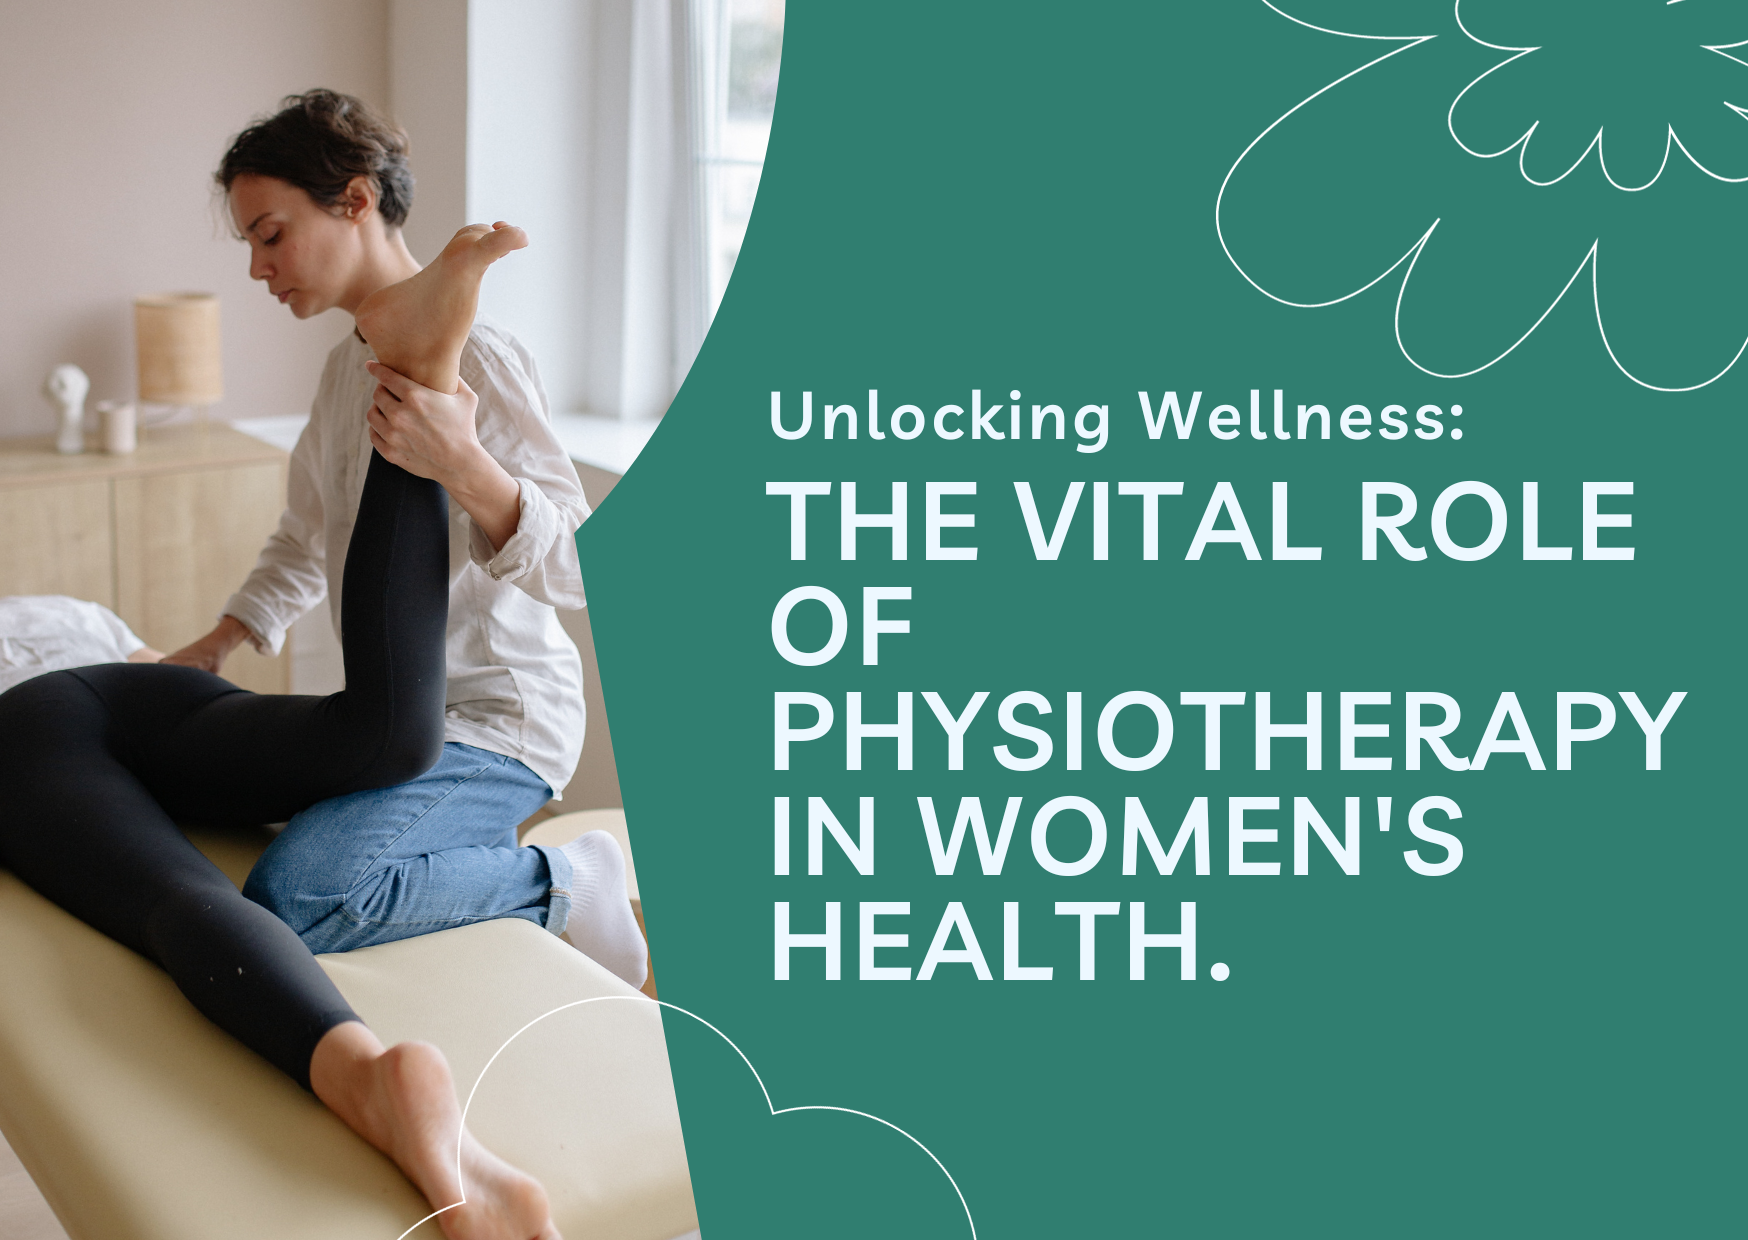 Unlocking Wellness: The Vital Role of Physiotherapy in Women's Health